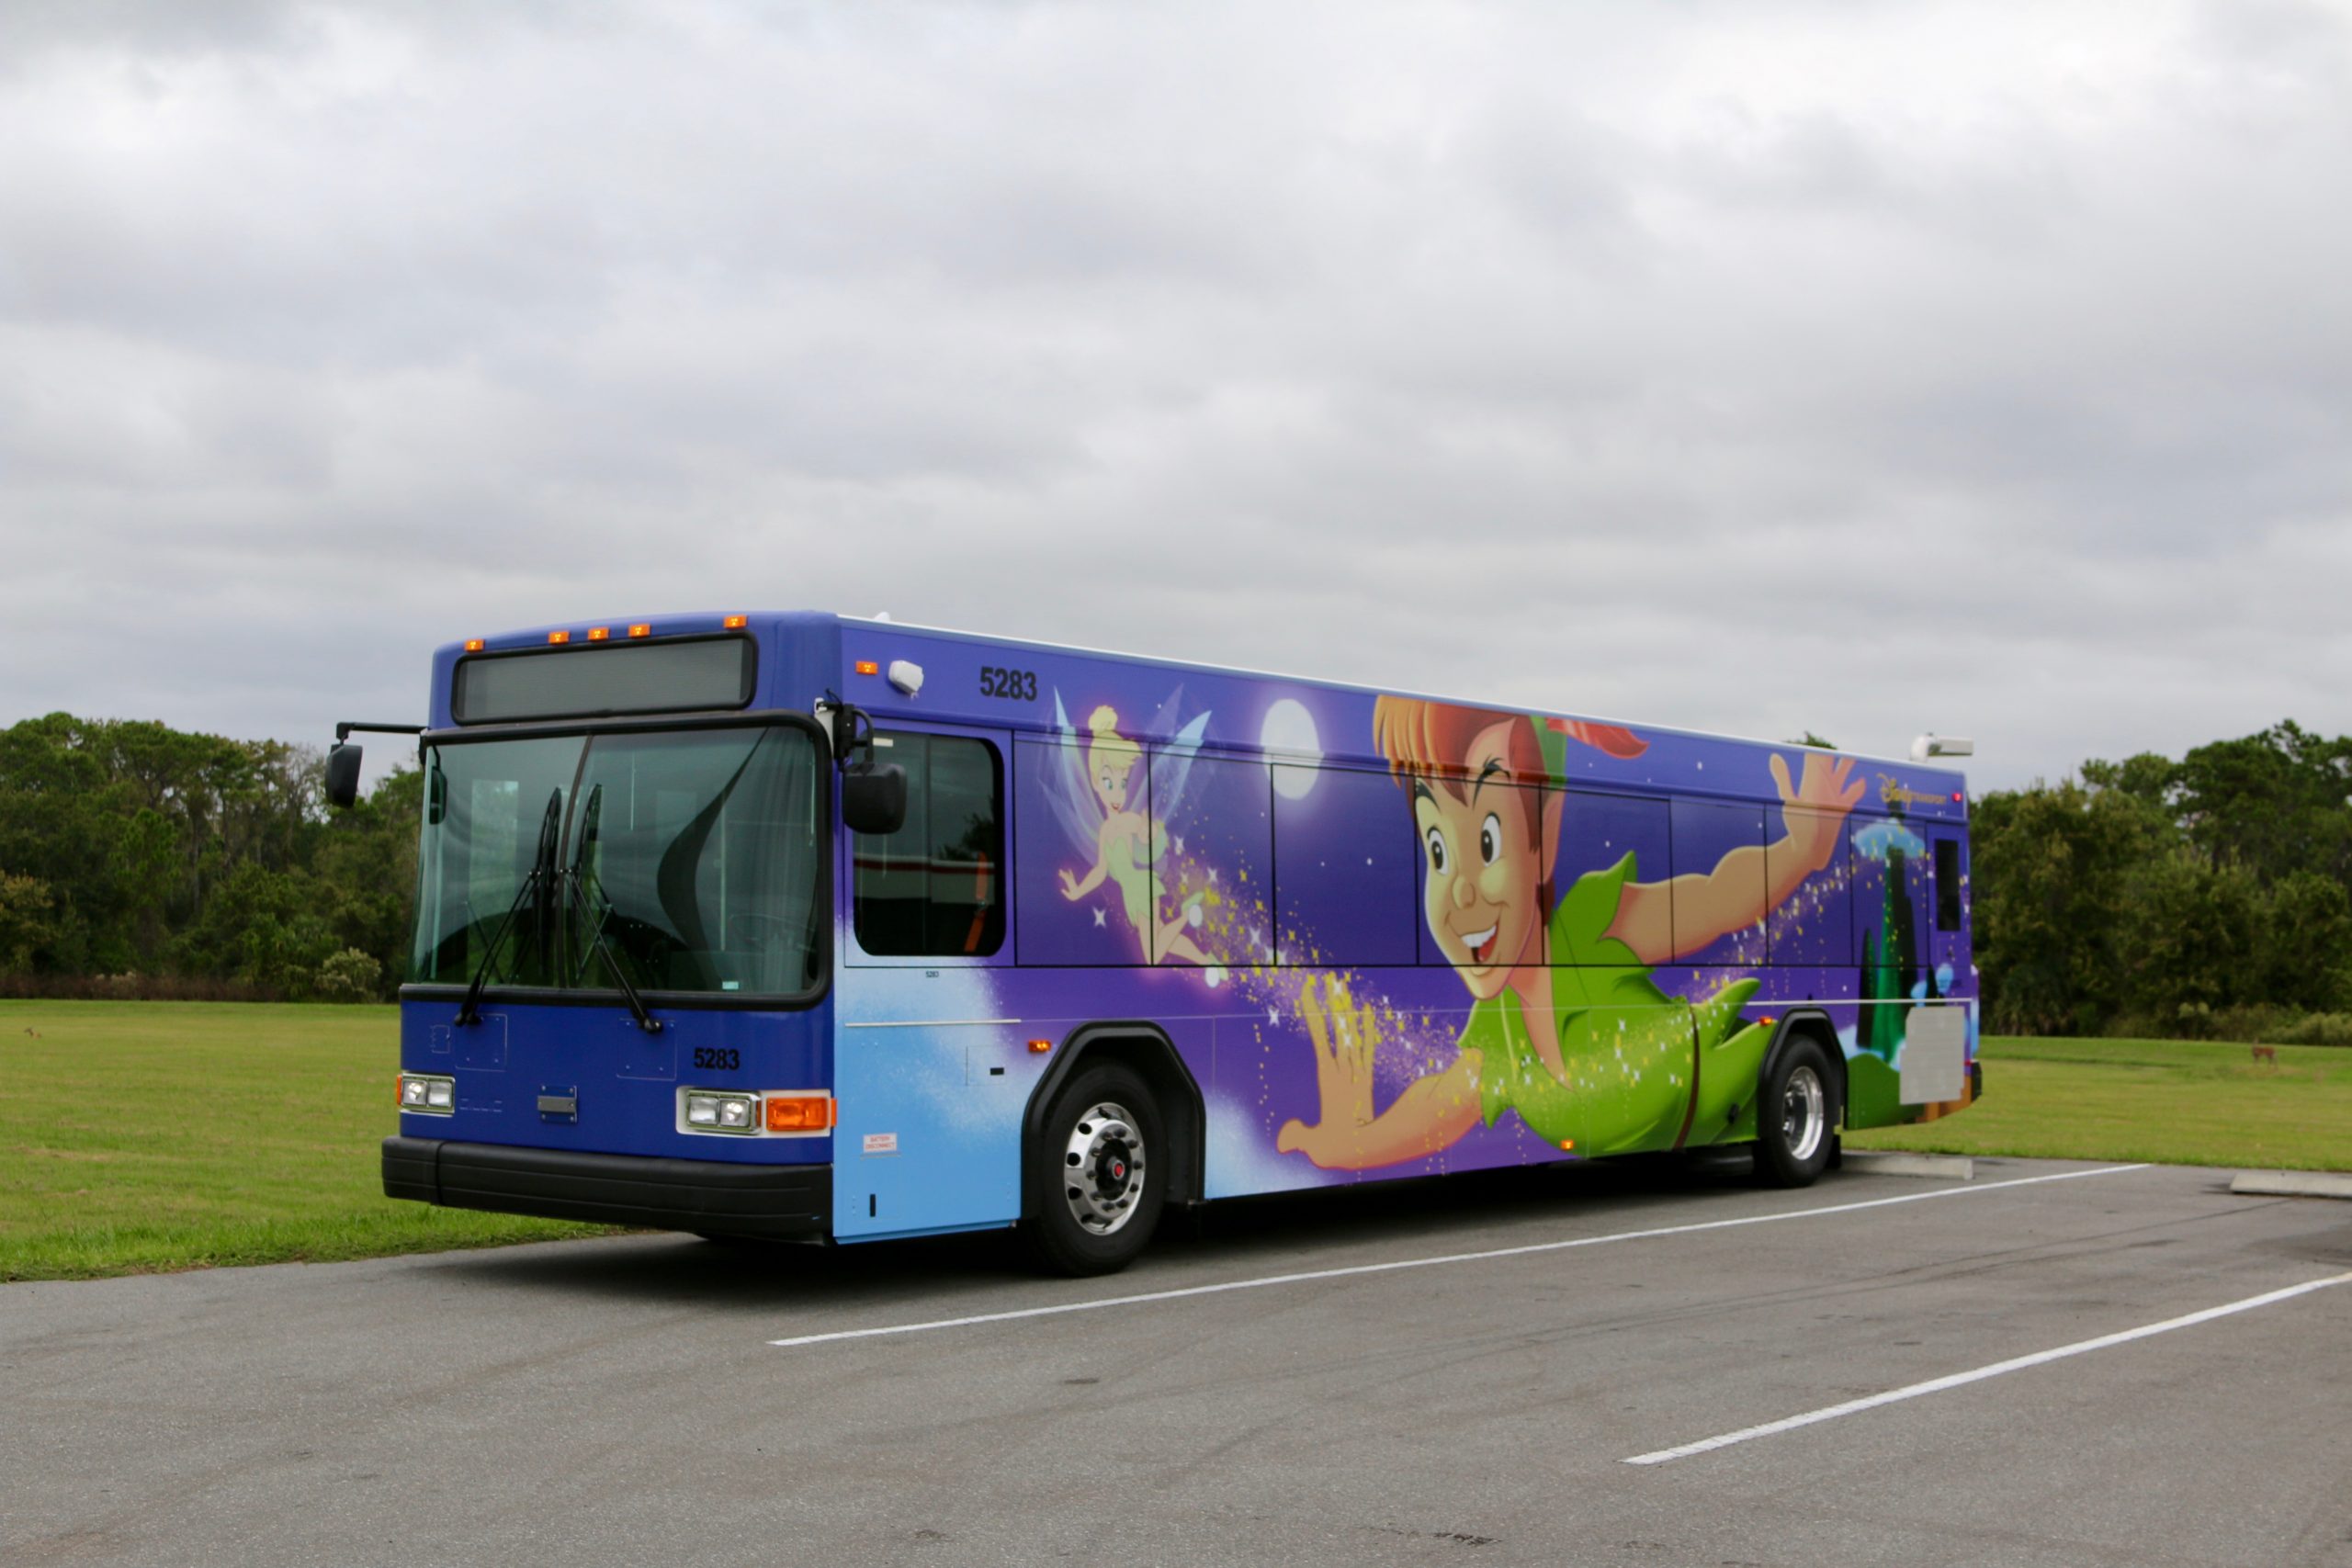 Disney World releases official transportation information for reopening